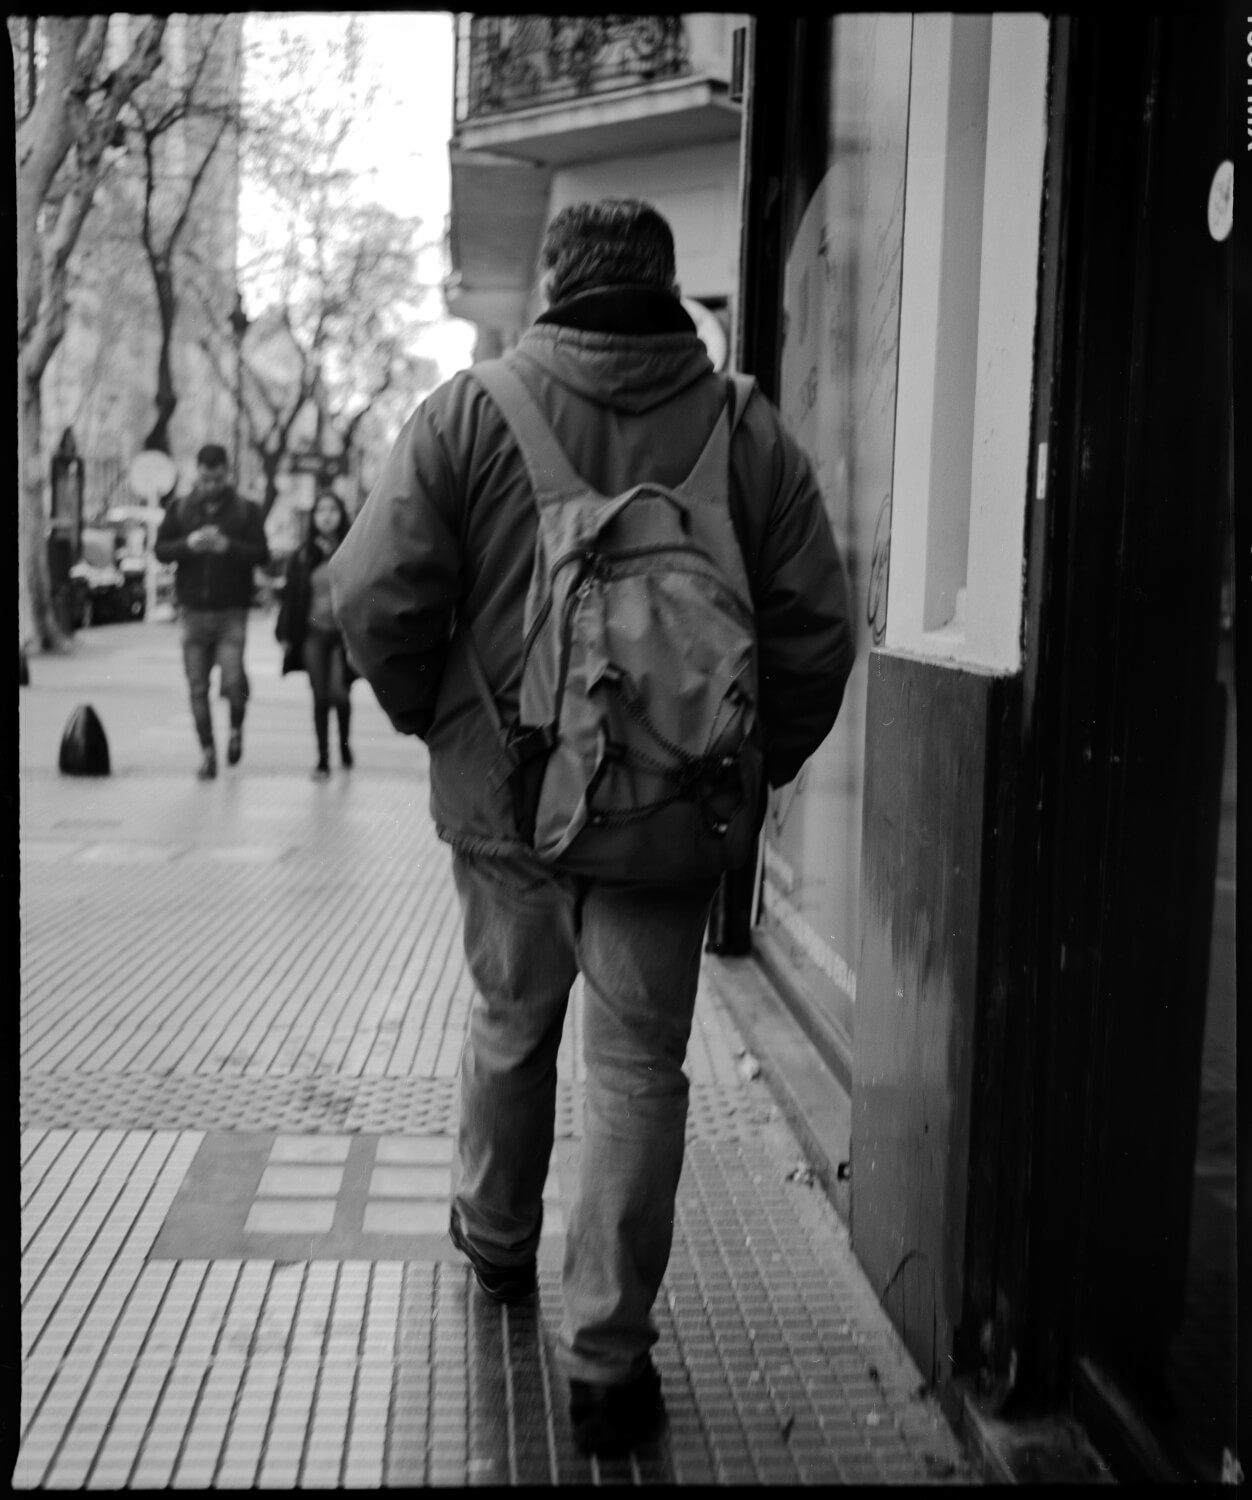 5 Frames... Of street photography in Buenos Aires on the Mamiya RB67 (120 format / EI 100 / Kodak T-MAX 100) - by Simón Ducos